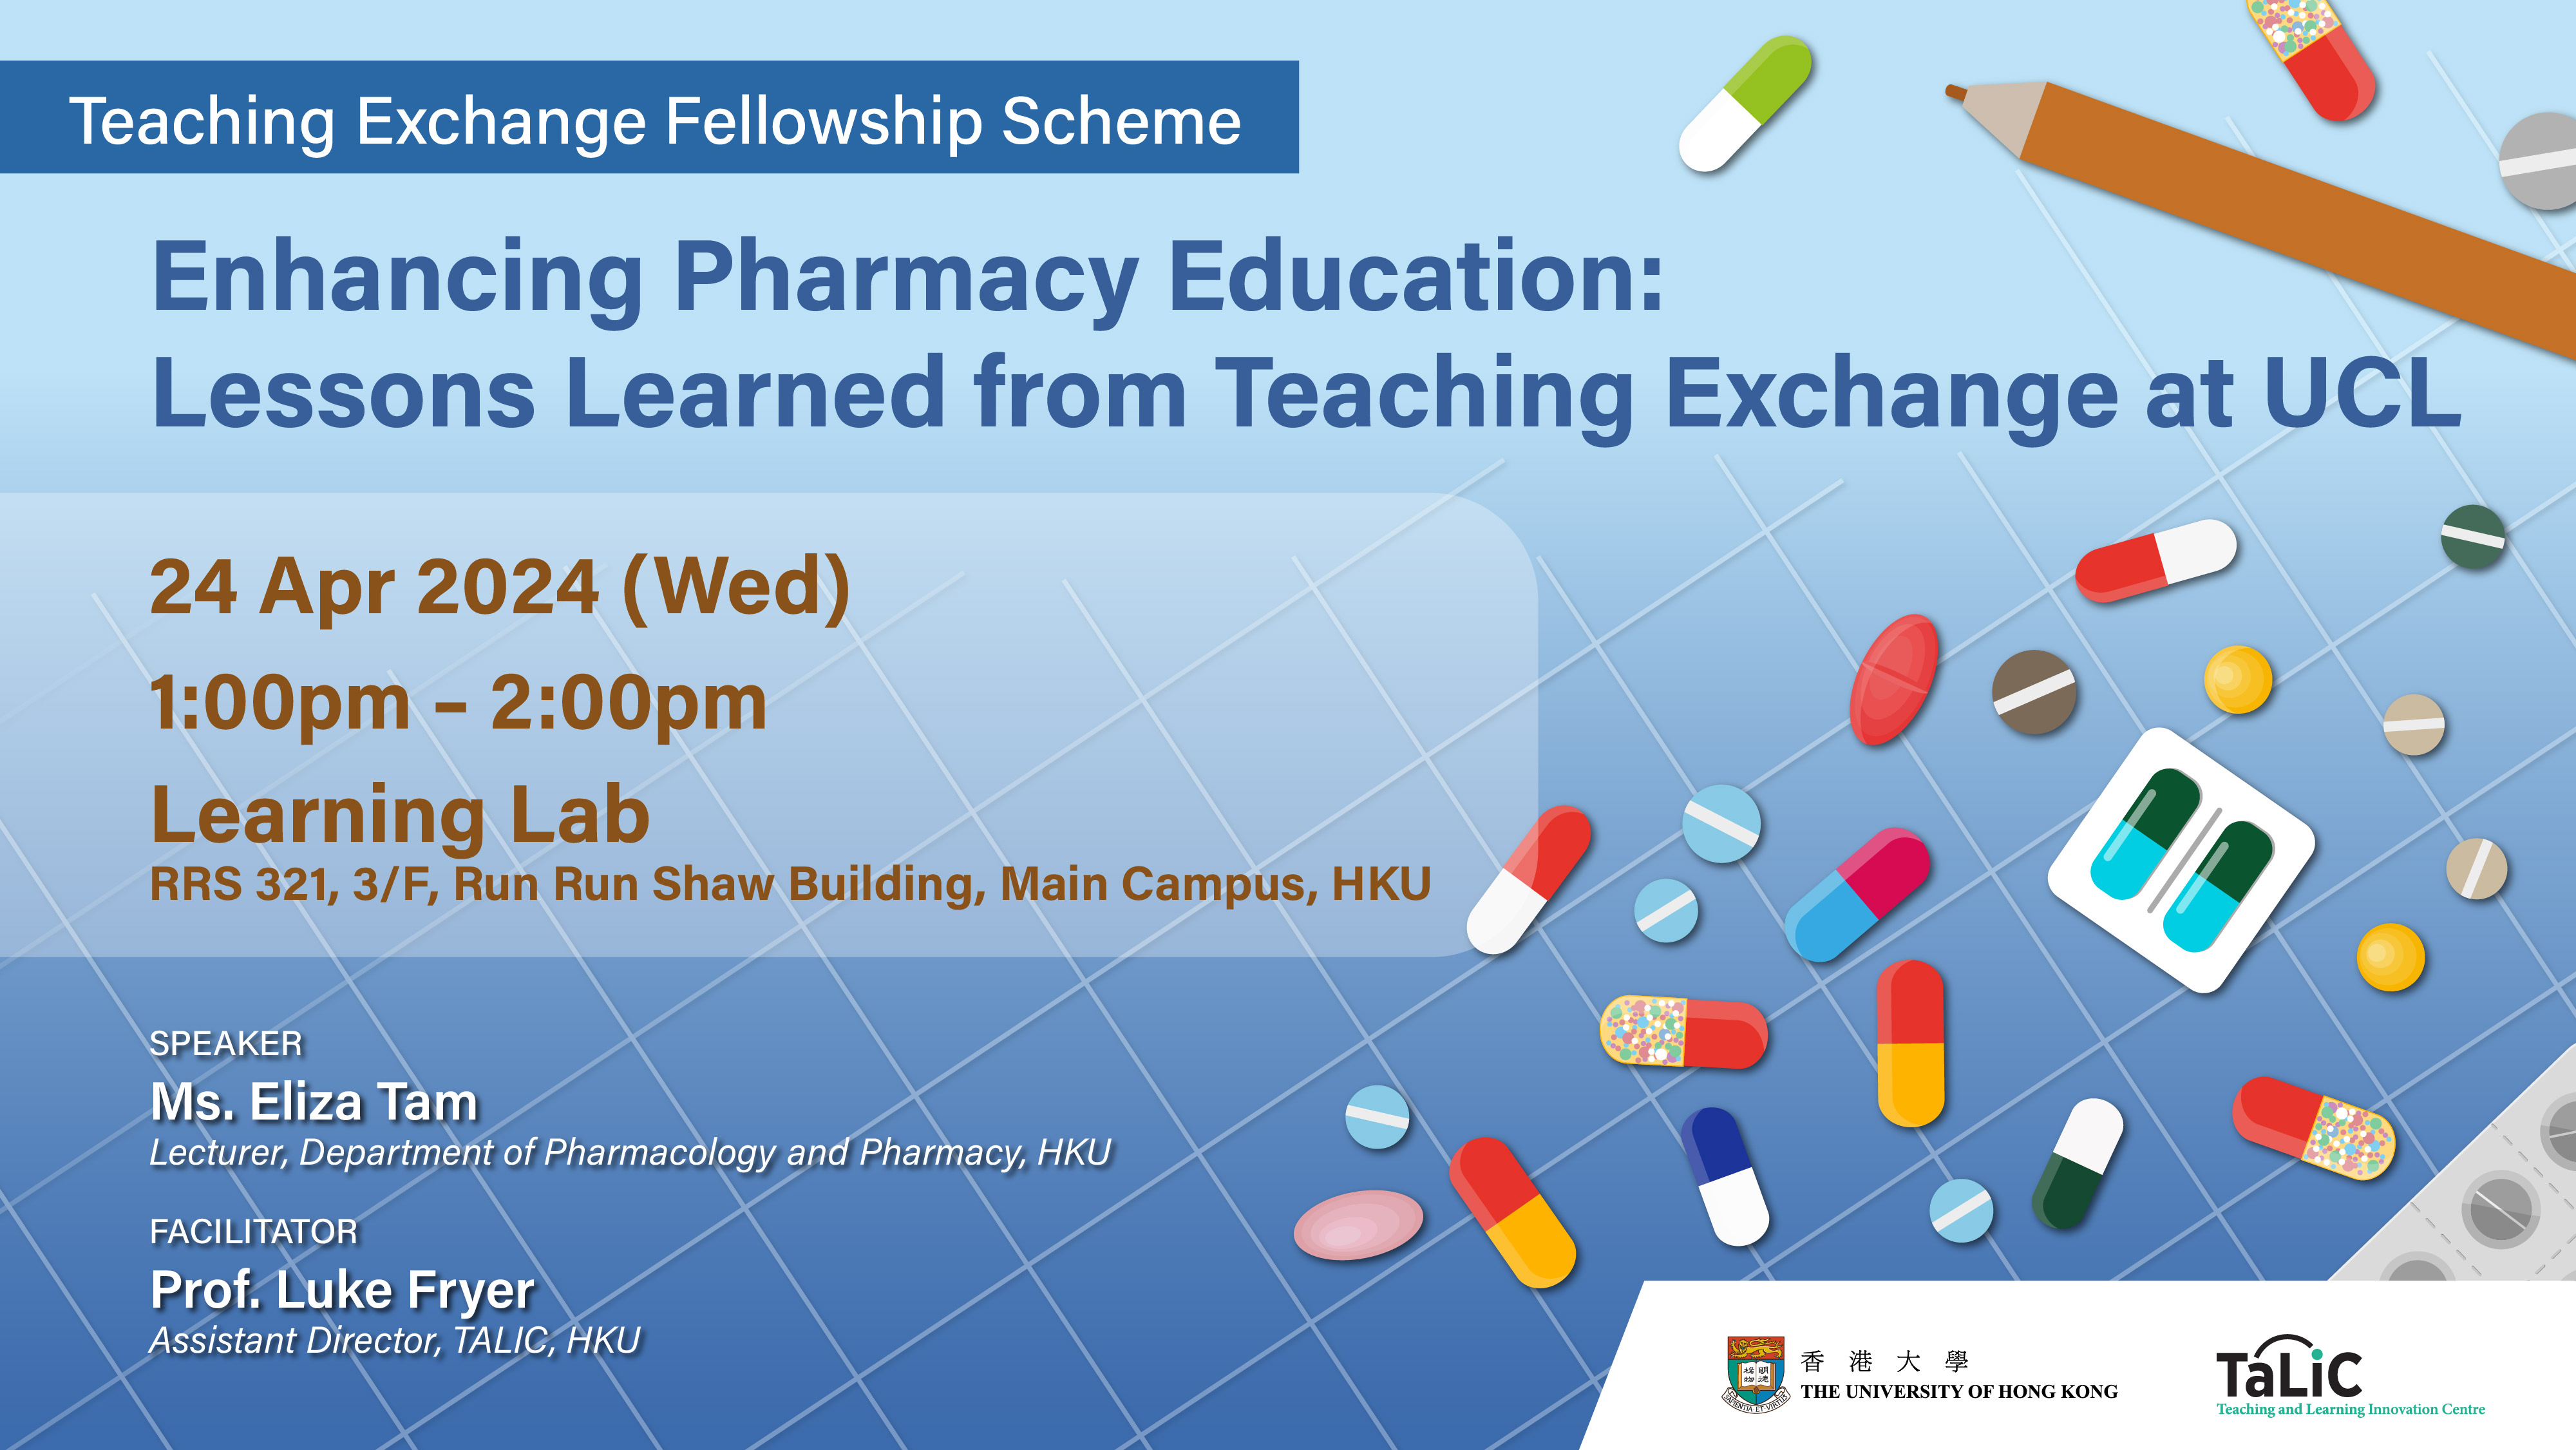 Enhancing Pharmacy Education: Lessons Learned from Teaching Exchange at UCL